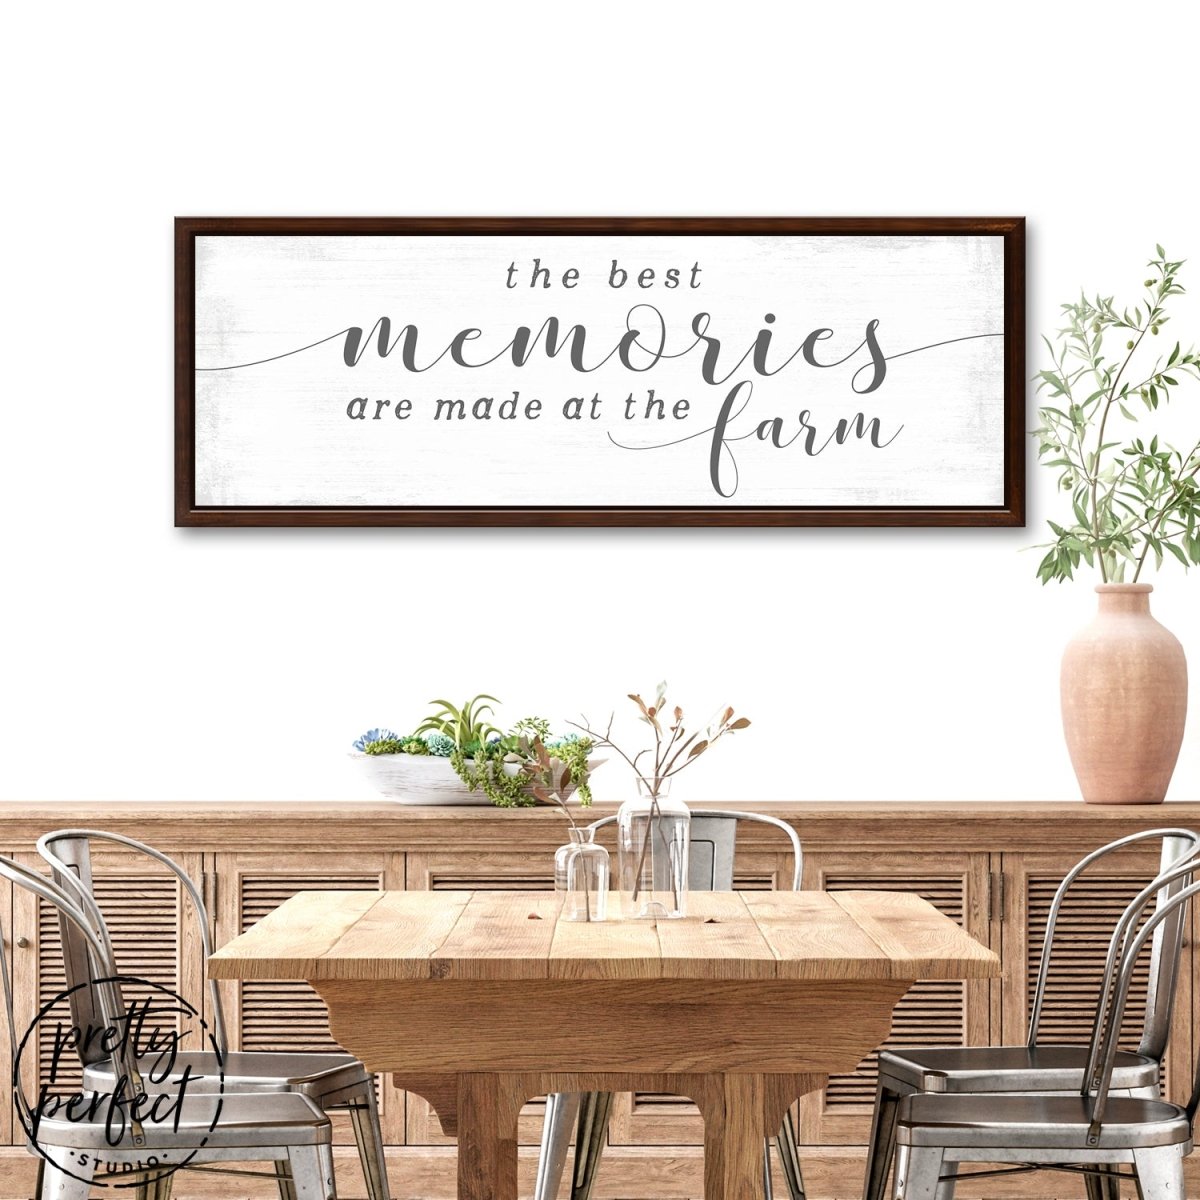 The Best Memories Are Made at the Farm Sign in Kitchen Above Table - Pretty Perfect Studio